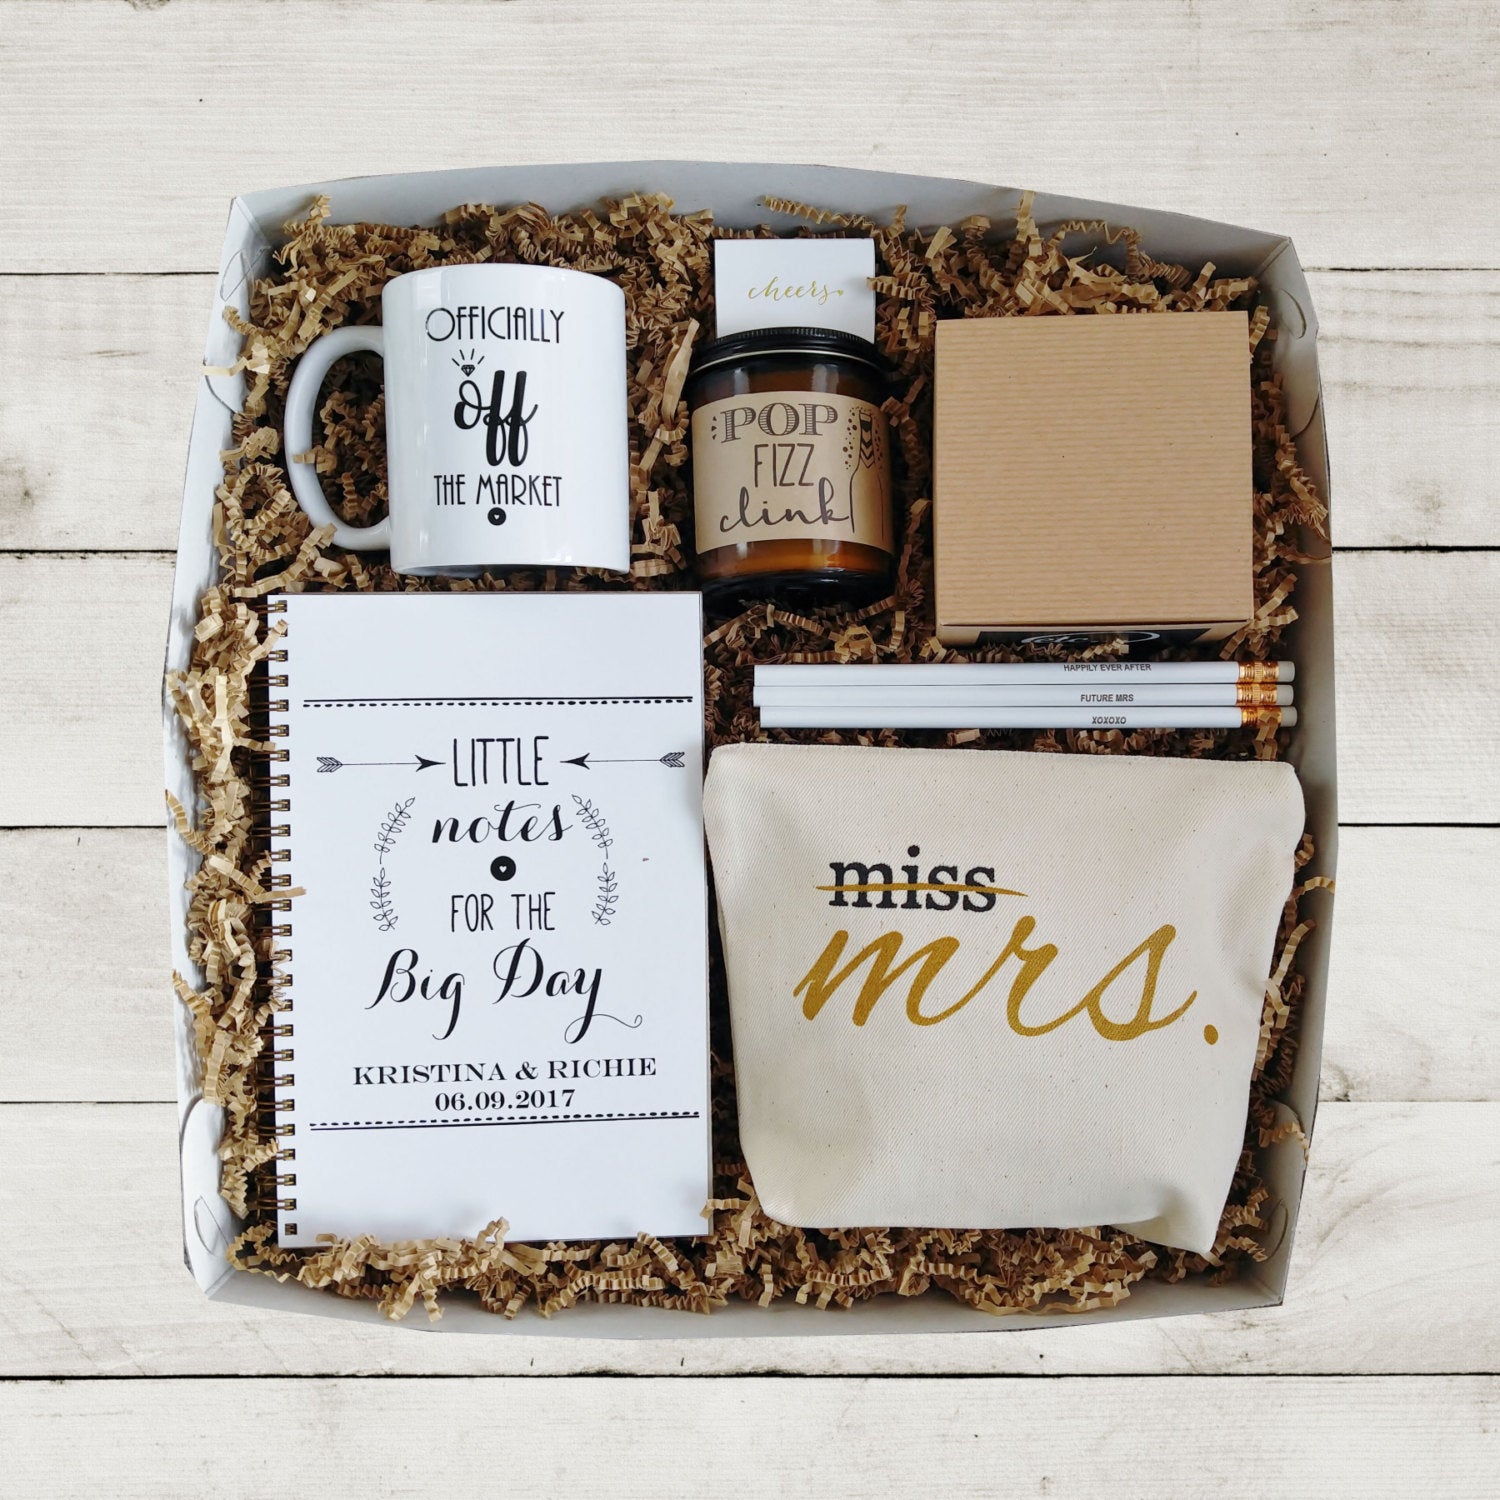 Future Mrs Gift Box Bride to Be Gift Bride Gift Box Newly Engaged Bridal  Shower Gift